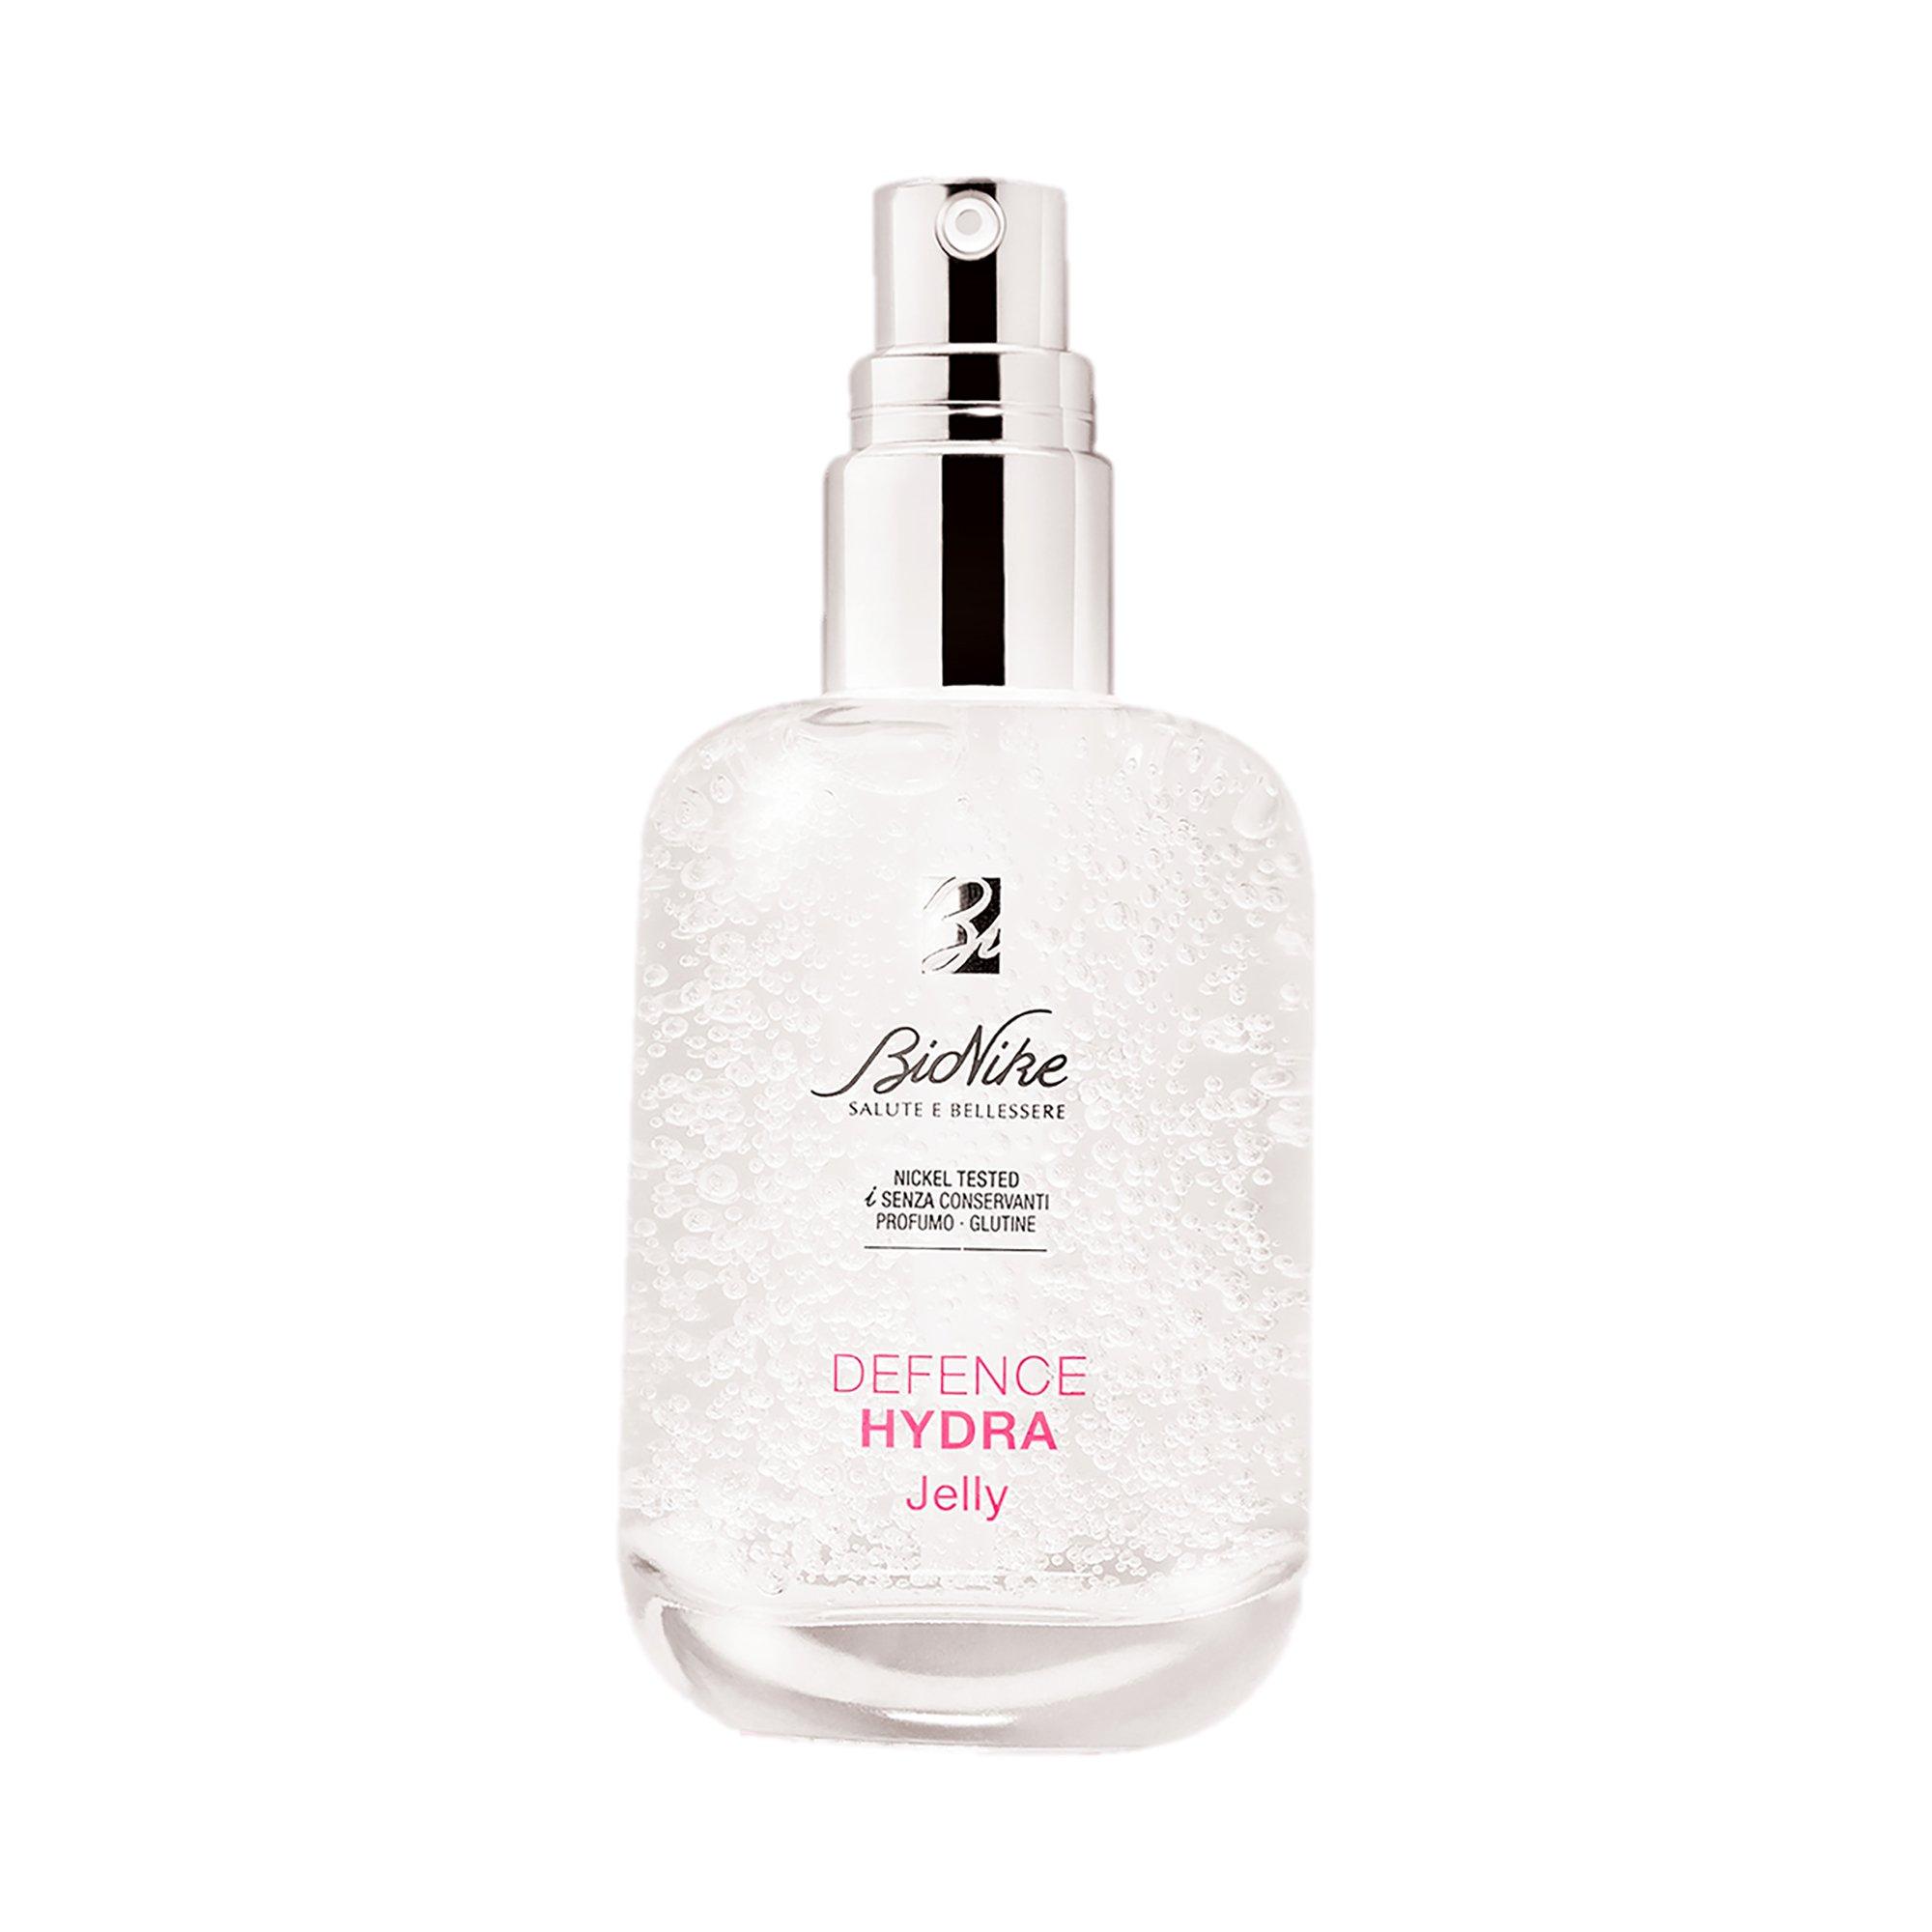 Image of BioNike DEFENCE HYDRA Jelly - 50ml